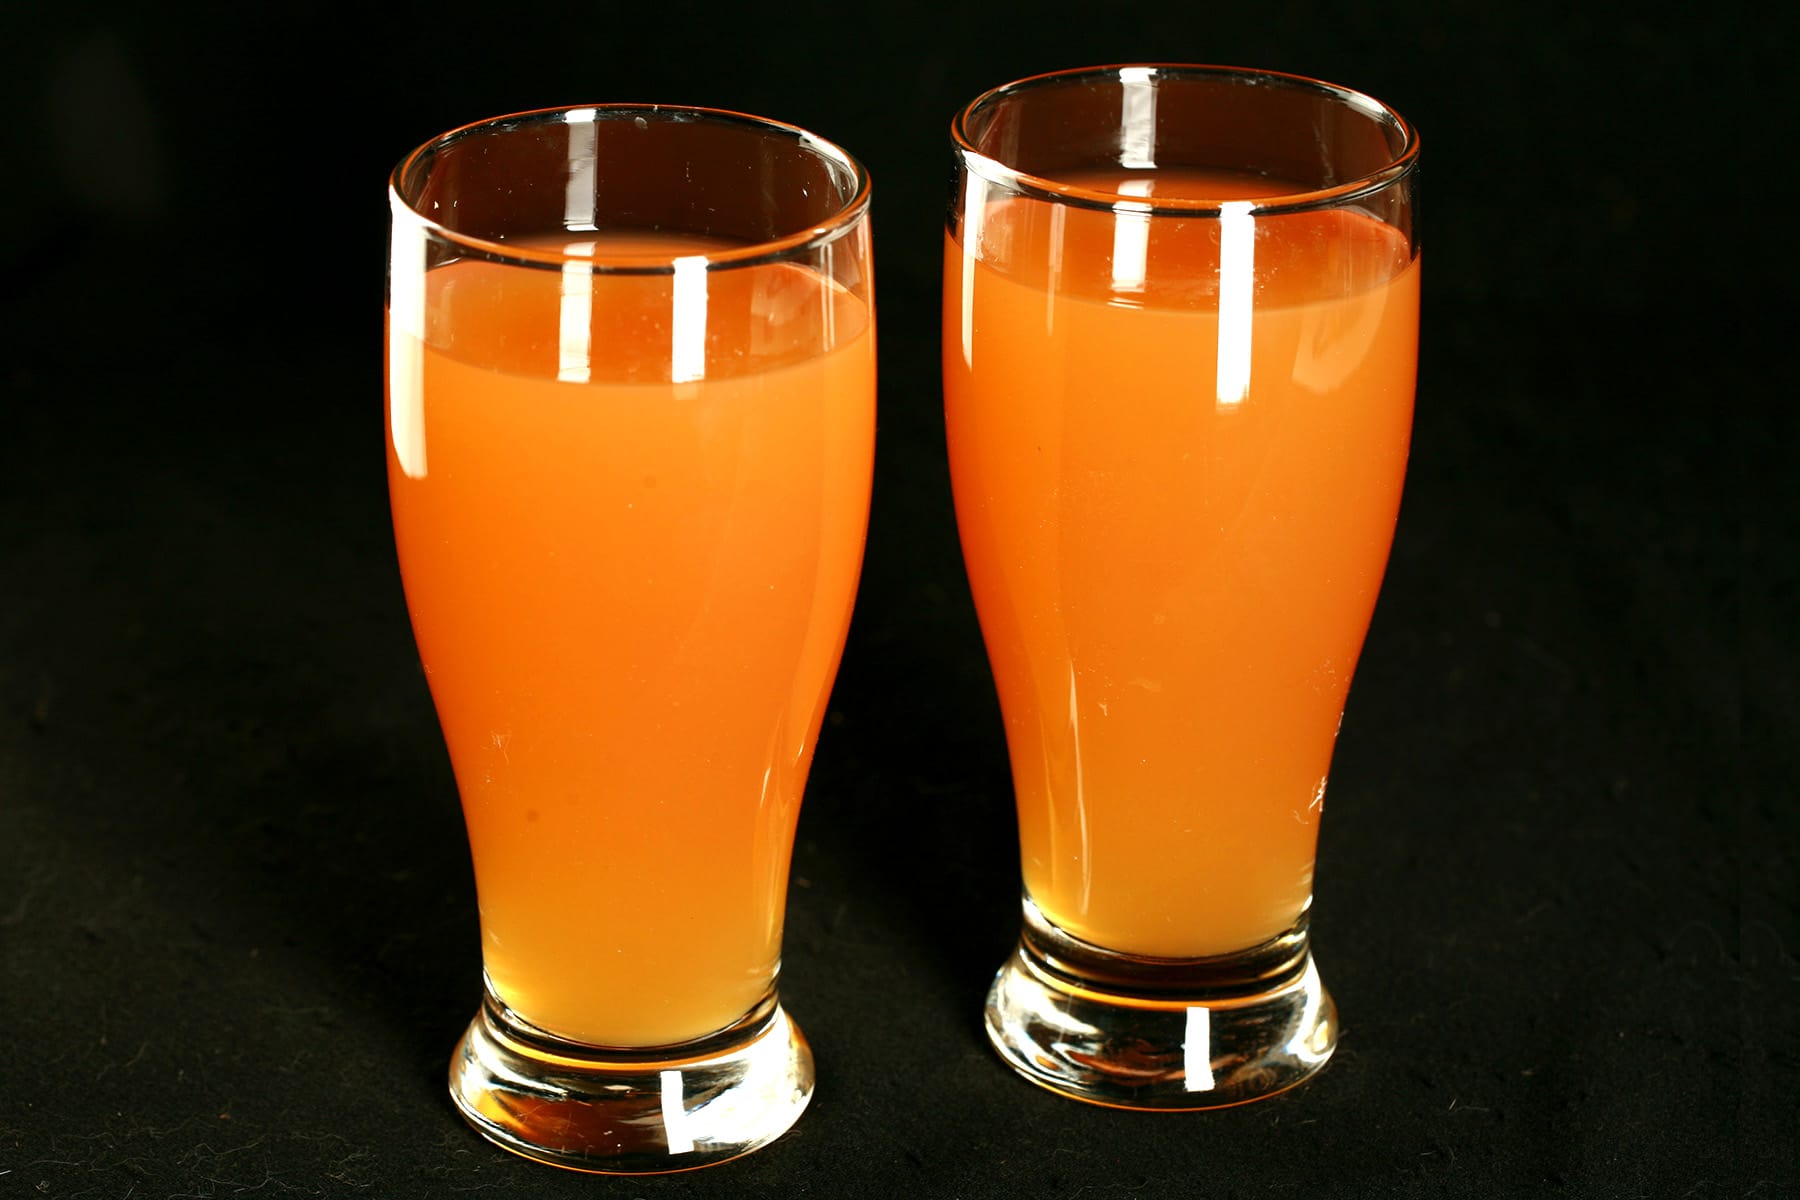 Two glasses of homemade Beep Drink - a orange coloured juice drink - against a black background.